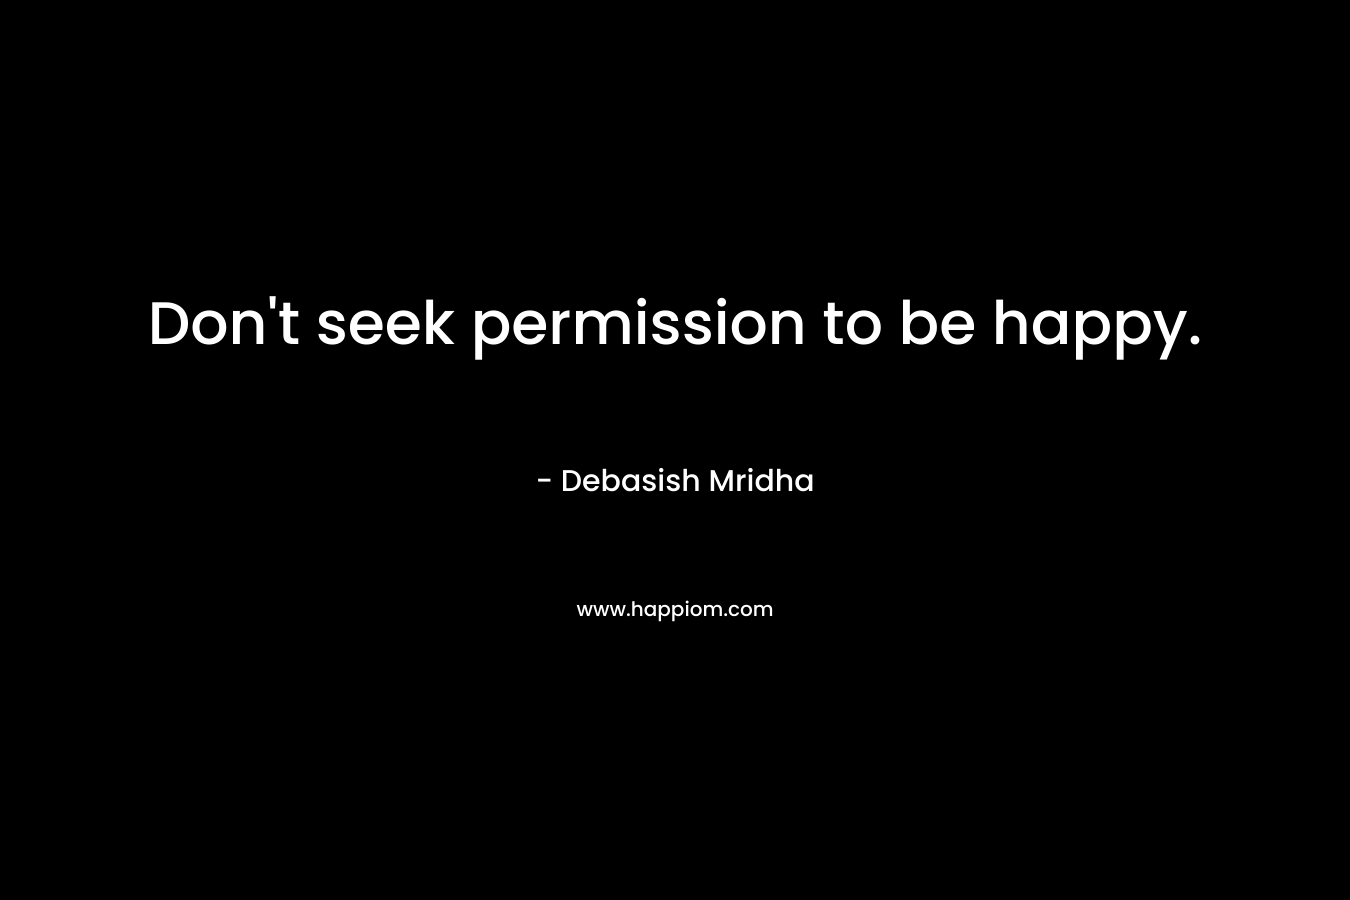 Don't seek permission to be happy.